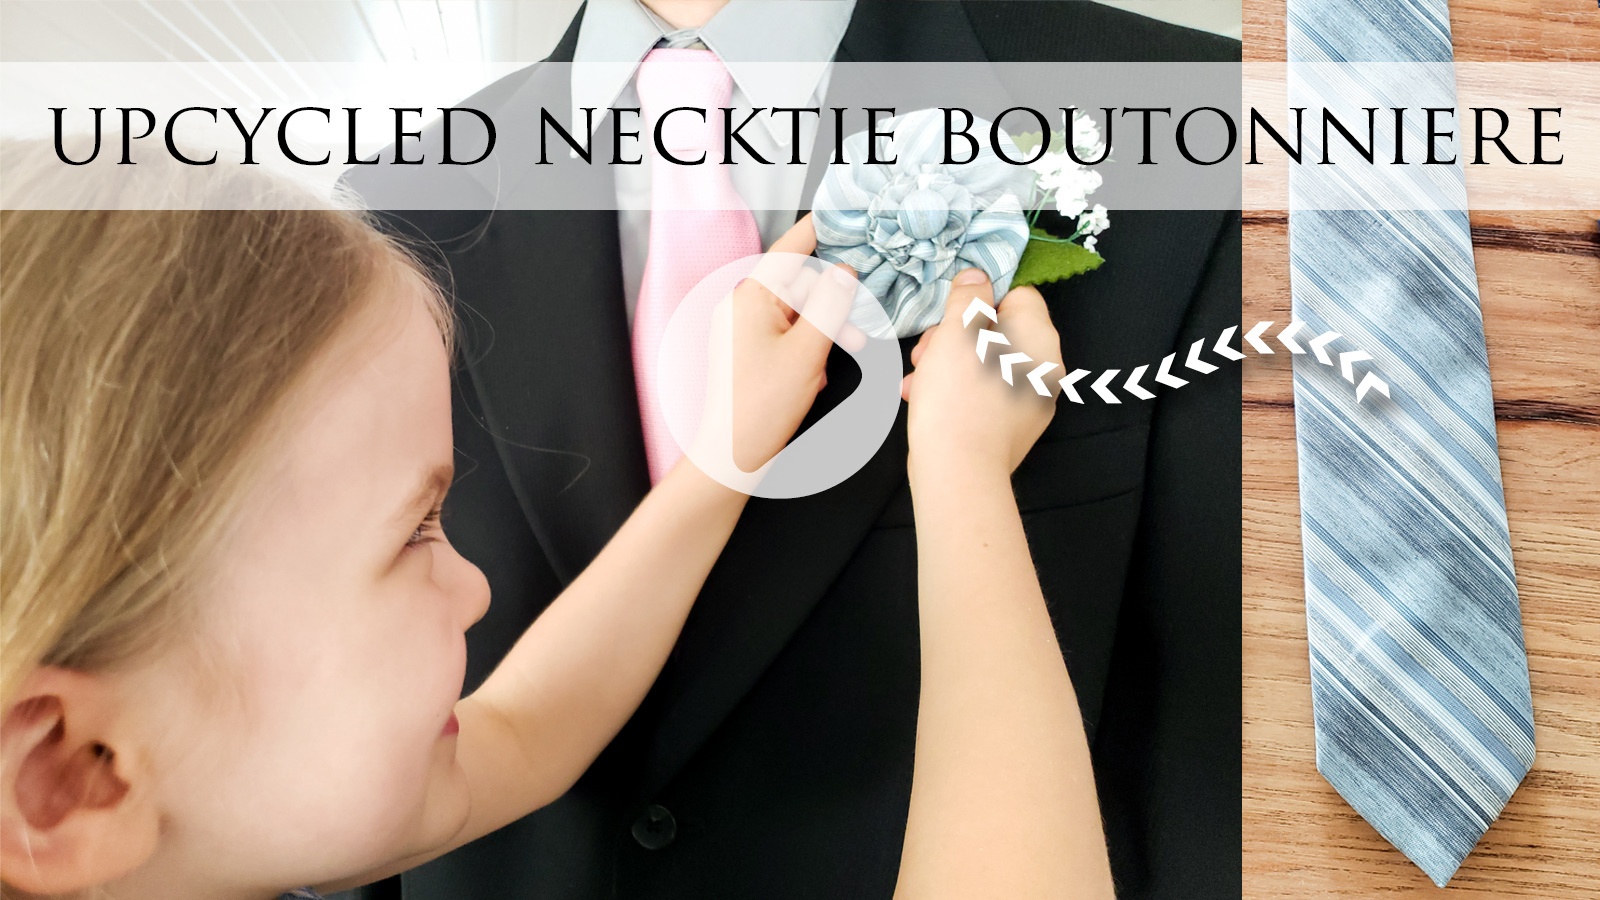 DIY Video Tutorial for Upcycled Necktie Boutonniere by Larissa of Prodigal Pieces | prodigalpieces.com #prodiaglpieces